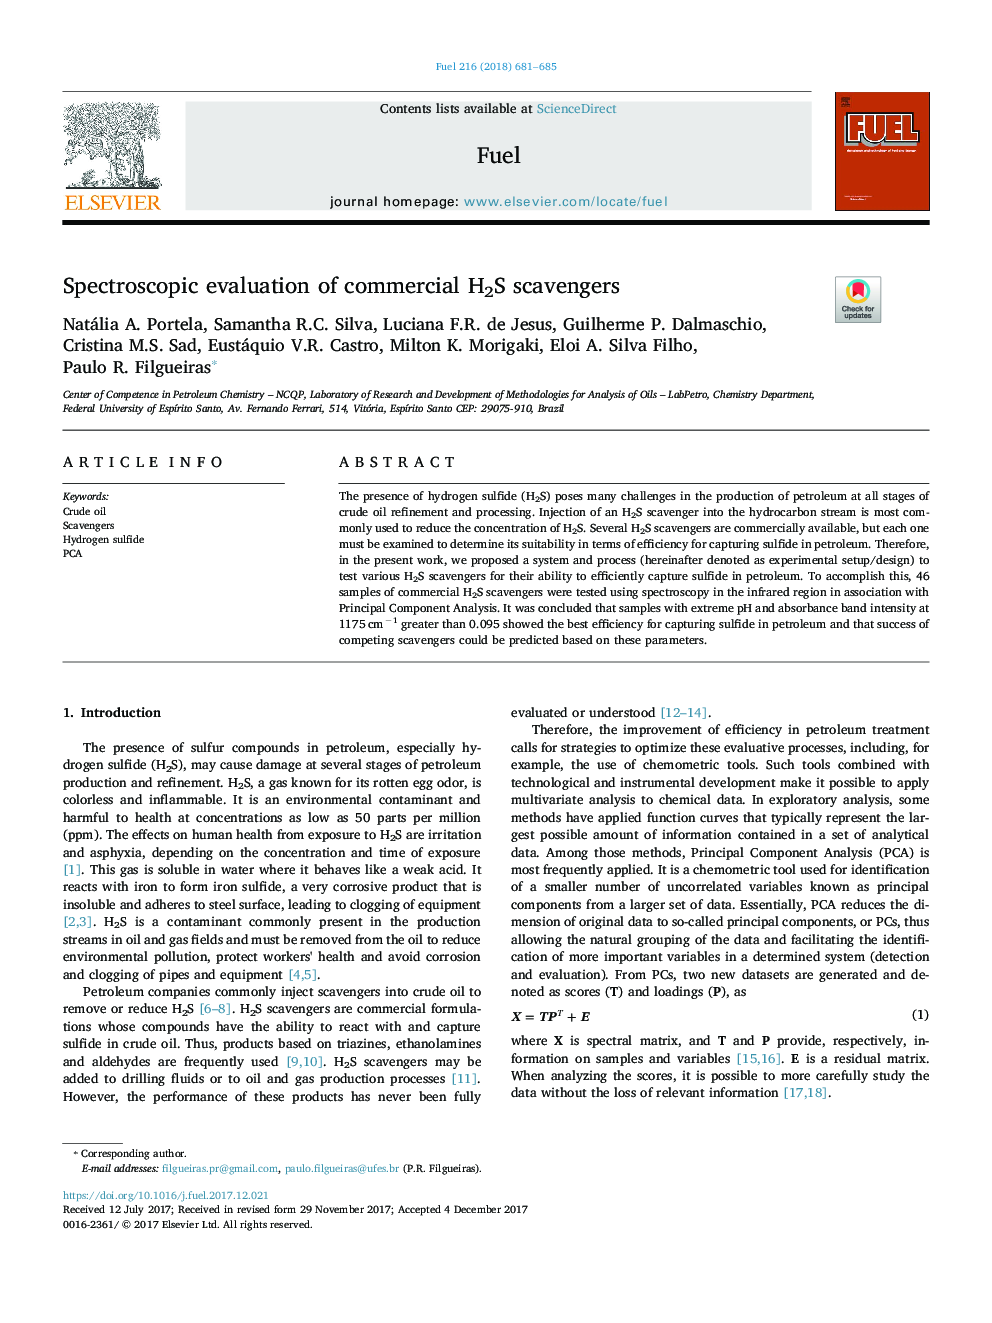 Spectroscopic evaluation of commercial H2S scavengers